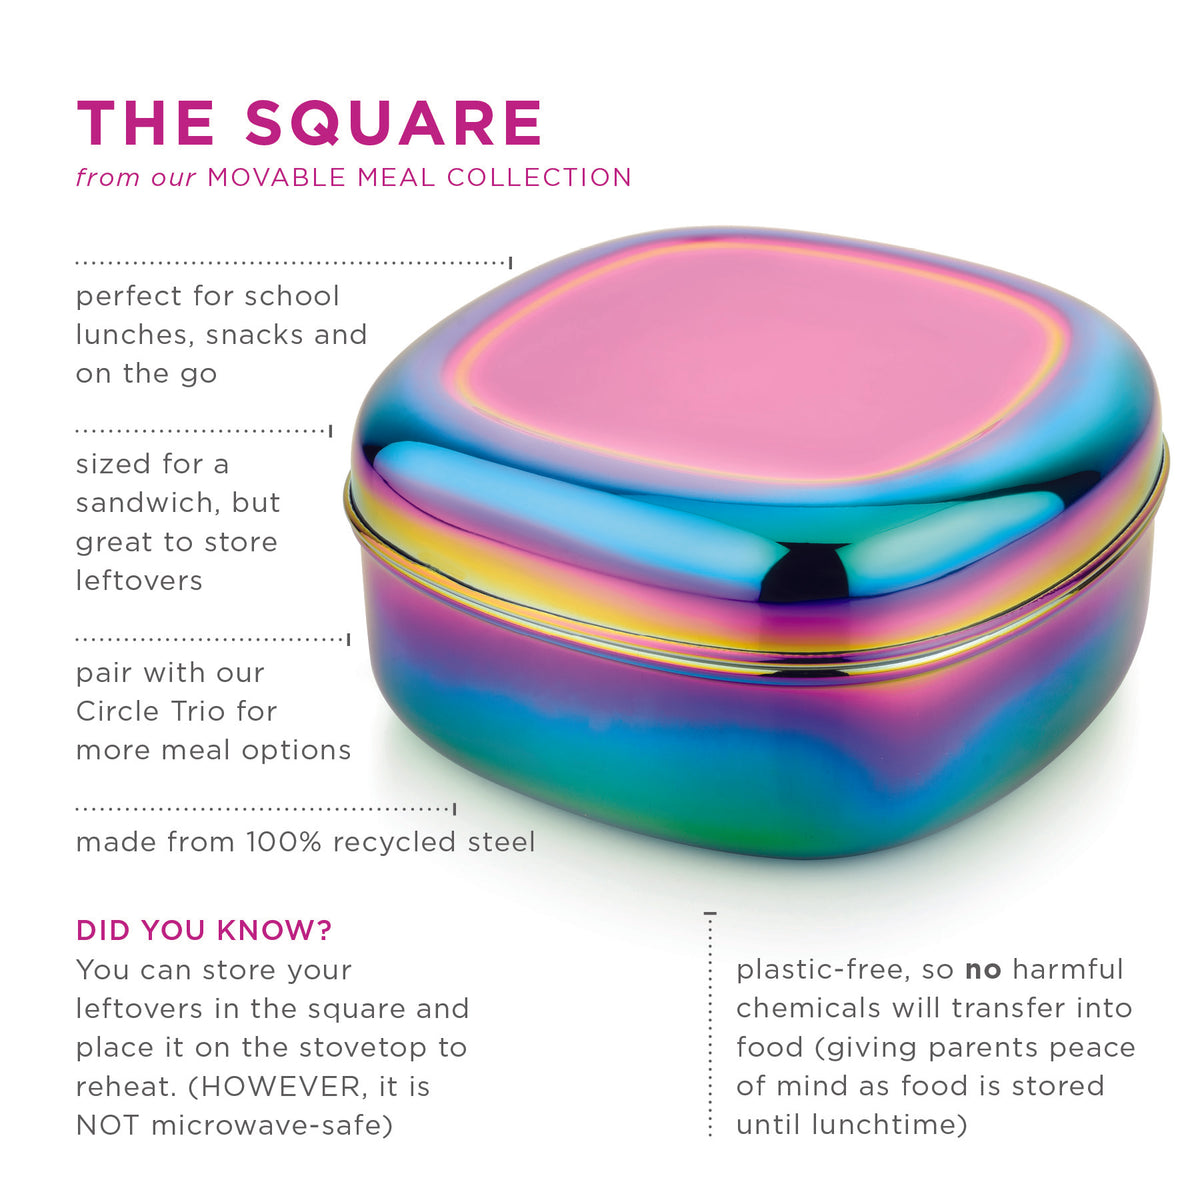 The square from our Movable Meal Collection is perfect for school lunches, snacks and on the go. Sized for a sandwich, but great for leftover storage. Pair with our Circle Trio for more meal options. Made from 100% recycled steel. Plastic-free, so no harmful chemicals will transfer into food (giving parents peace of mind as food is stored until lunchtime).